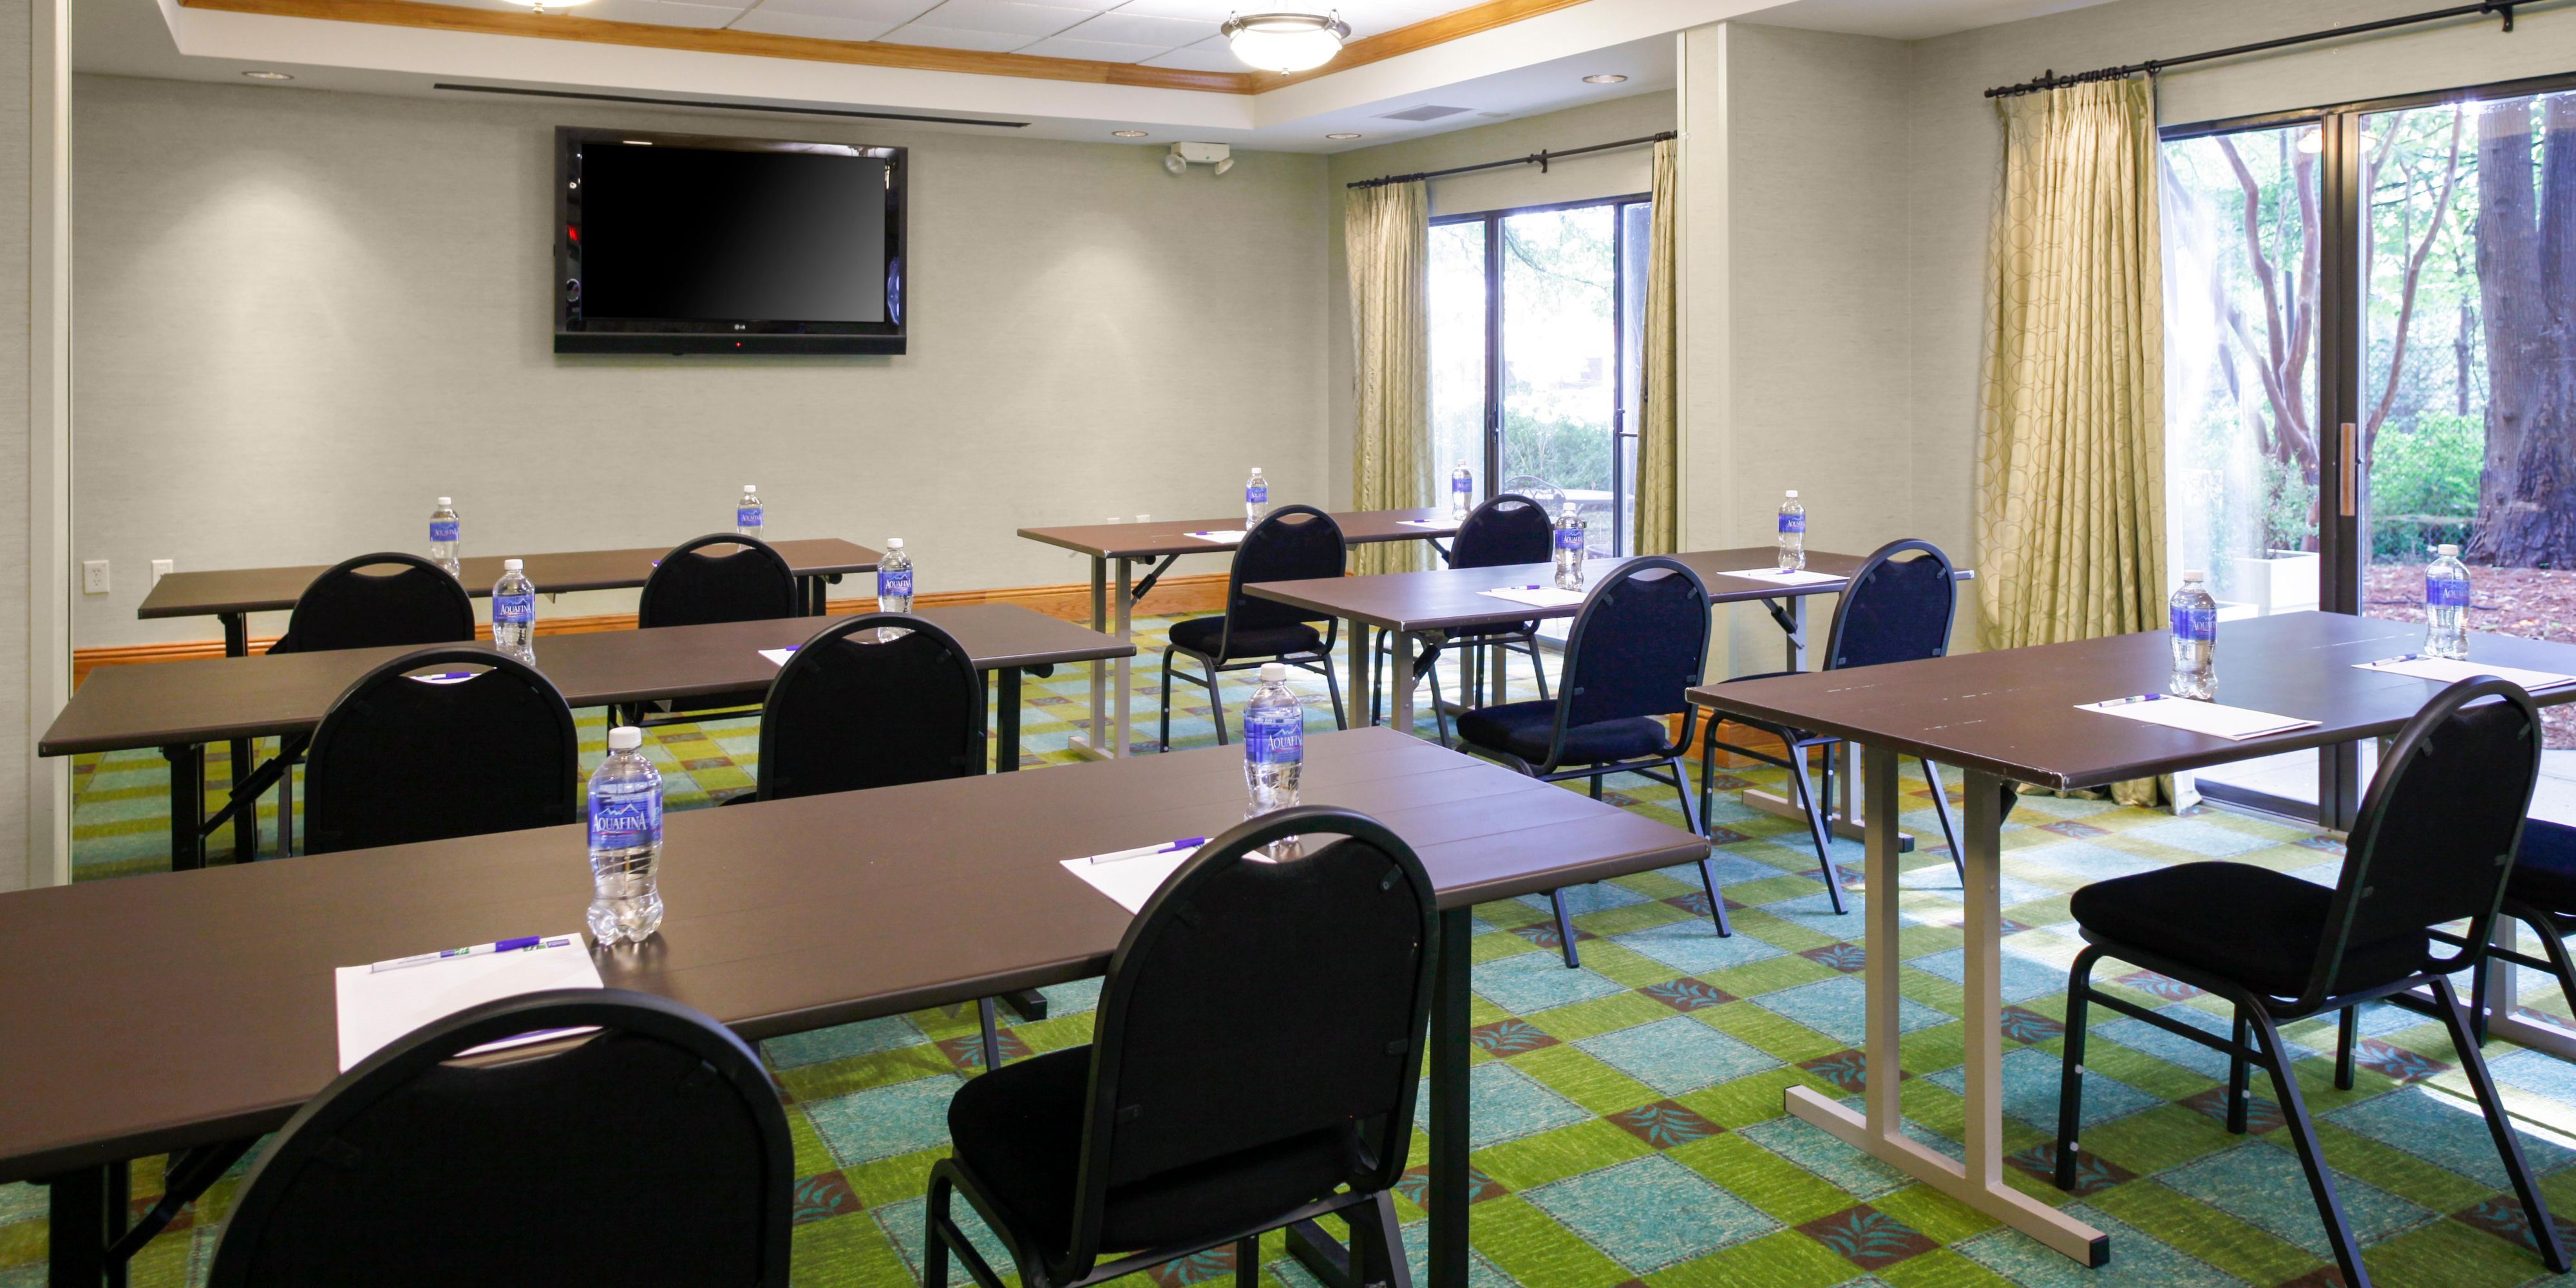 The Holiday Inn Express & Suites Atlanta Buckhead offers professional event space, modern amenities and experienced staff for both training and corporate events. Our hotel provides high tech audiovisual equipment to ensure your meeting is a success.